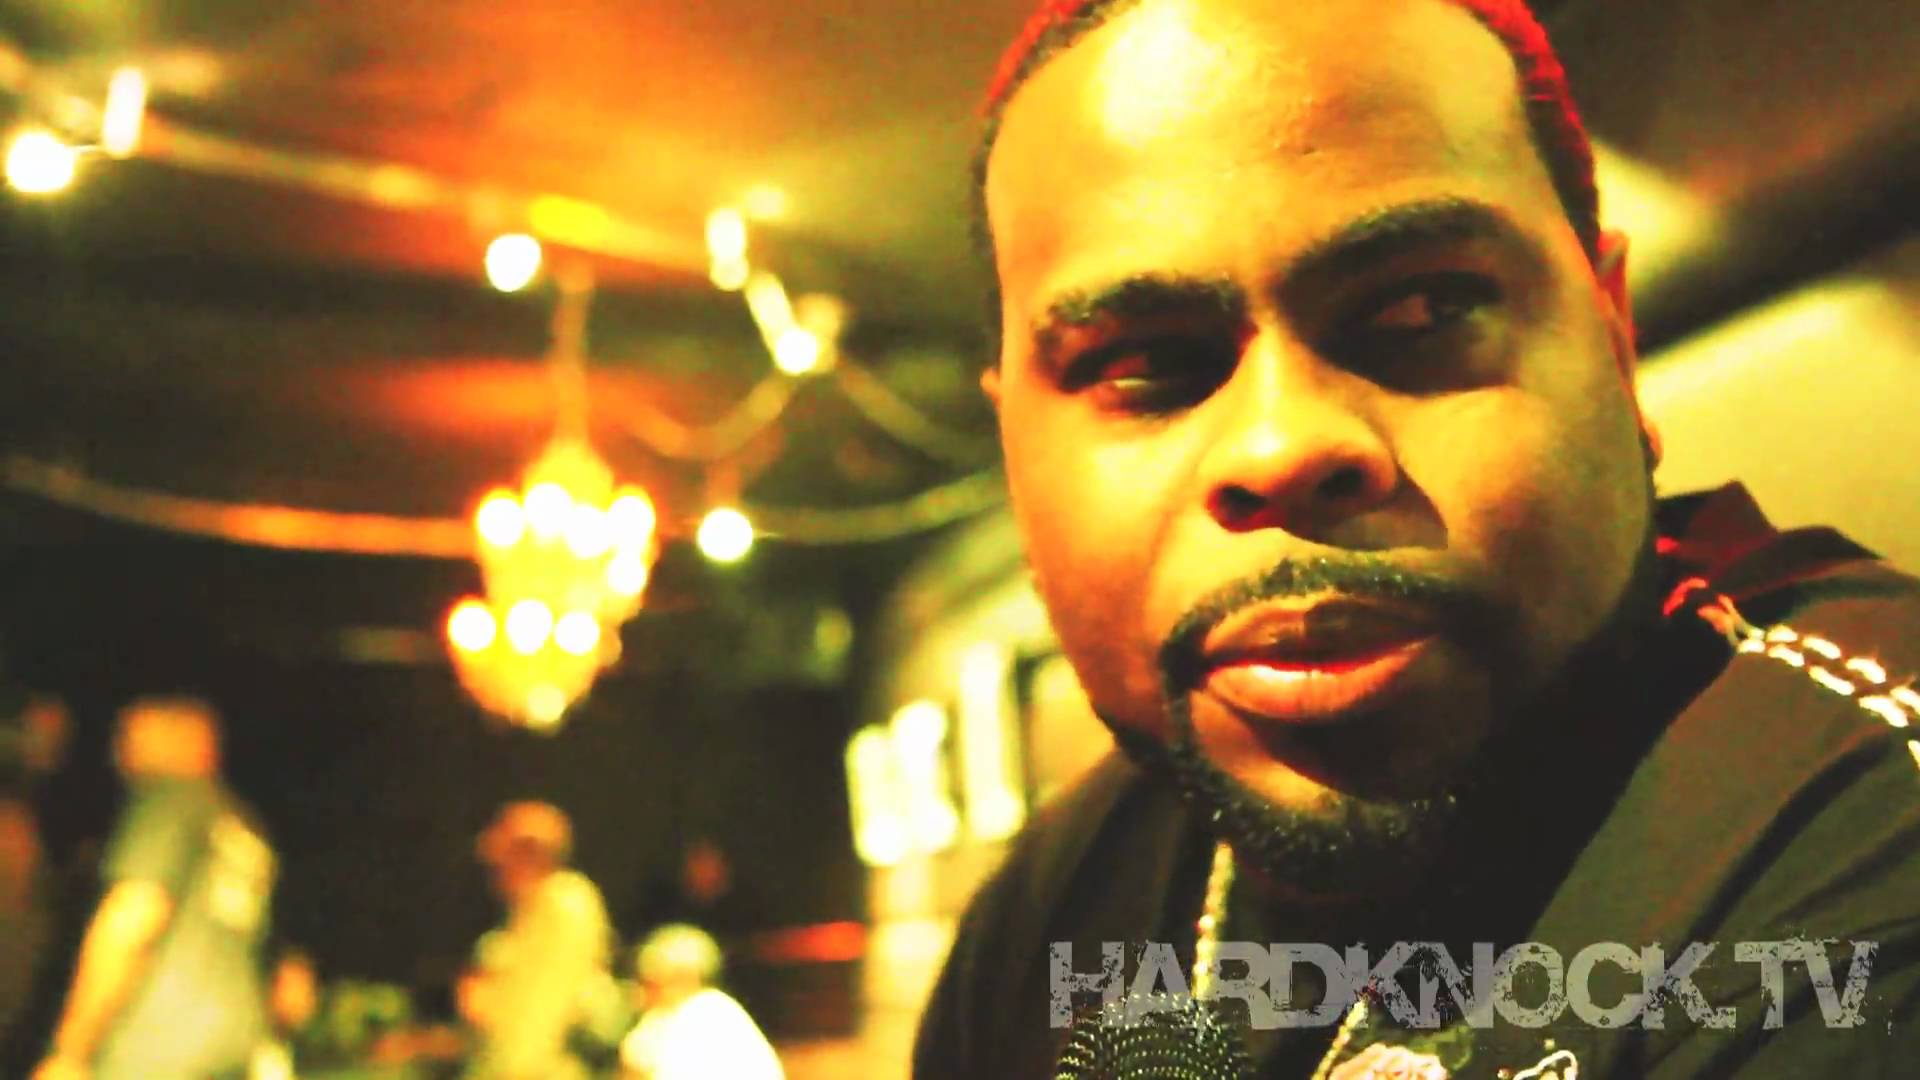 Crooked I addresses beef with Wu-Tang and Snoop Dogg